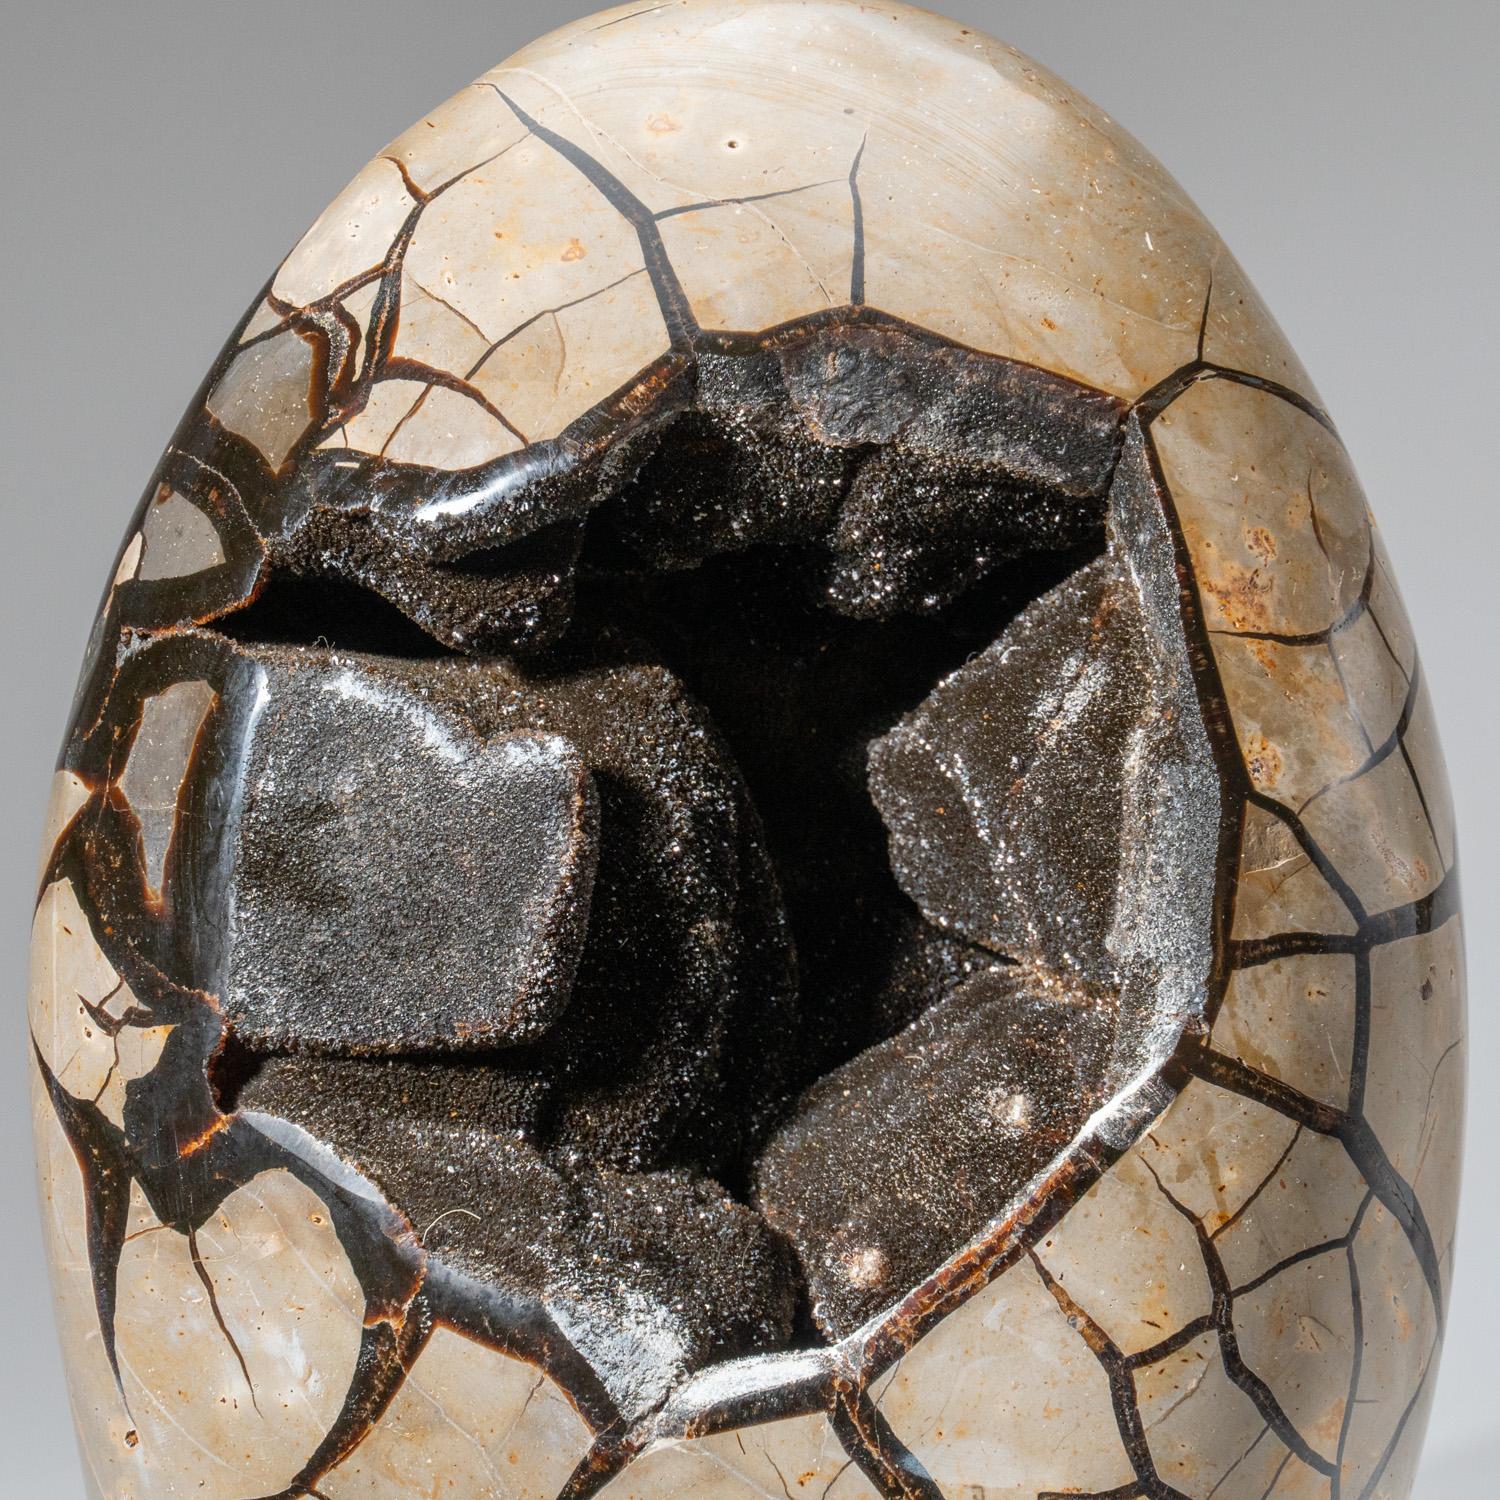 Malagasy Polished Septarian Druzy Geode Egg from Madagascar (35 lbs) For Sale